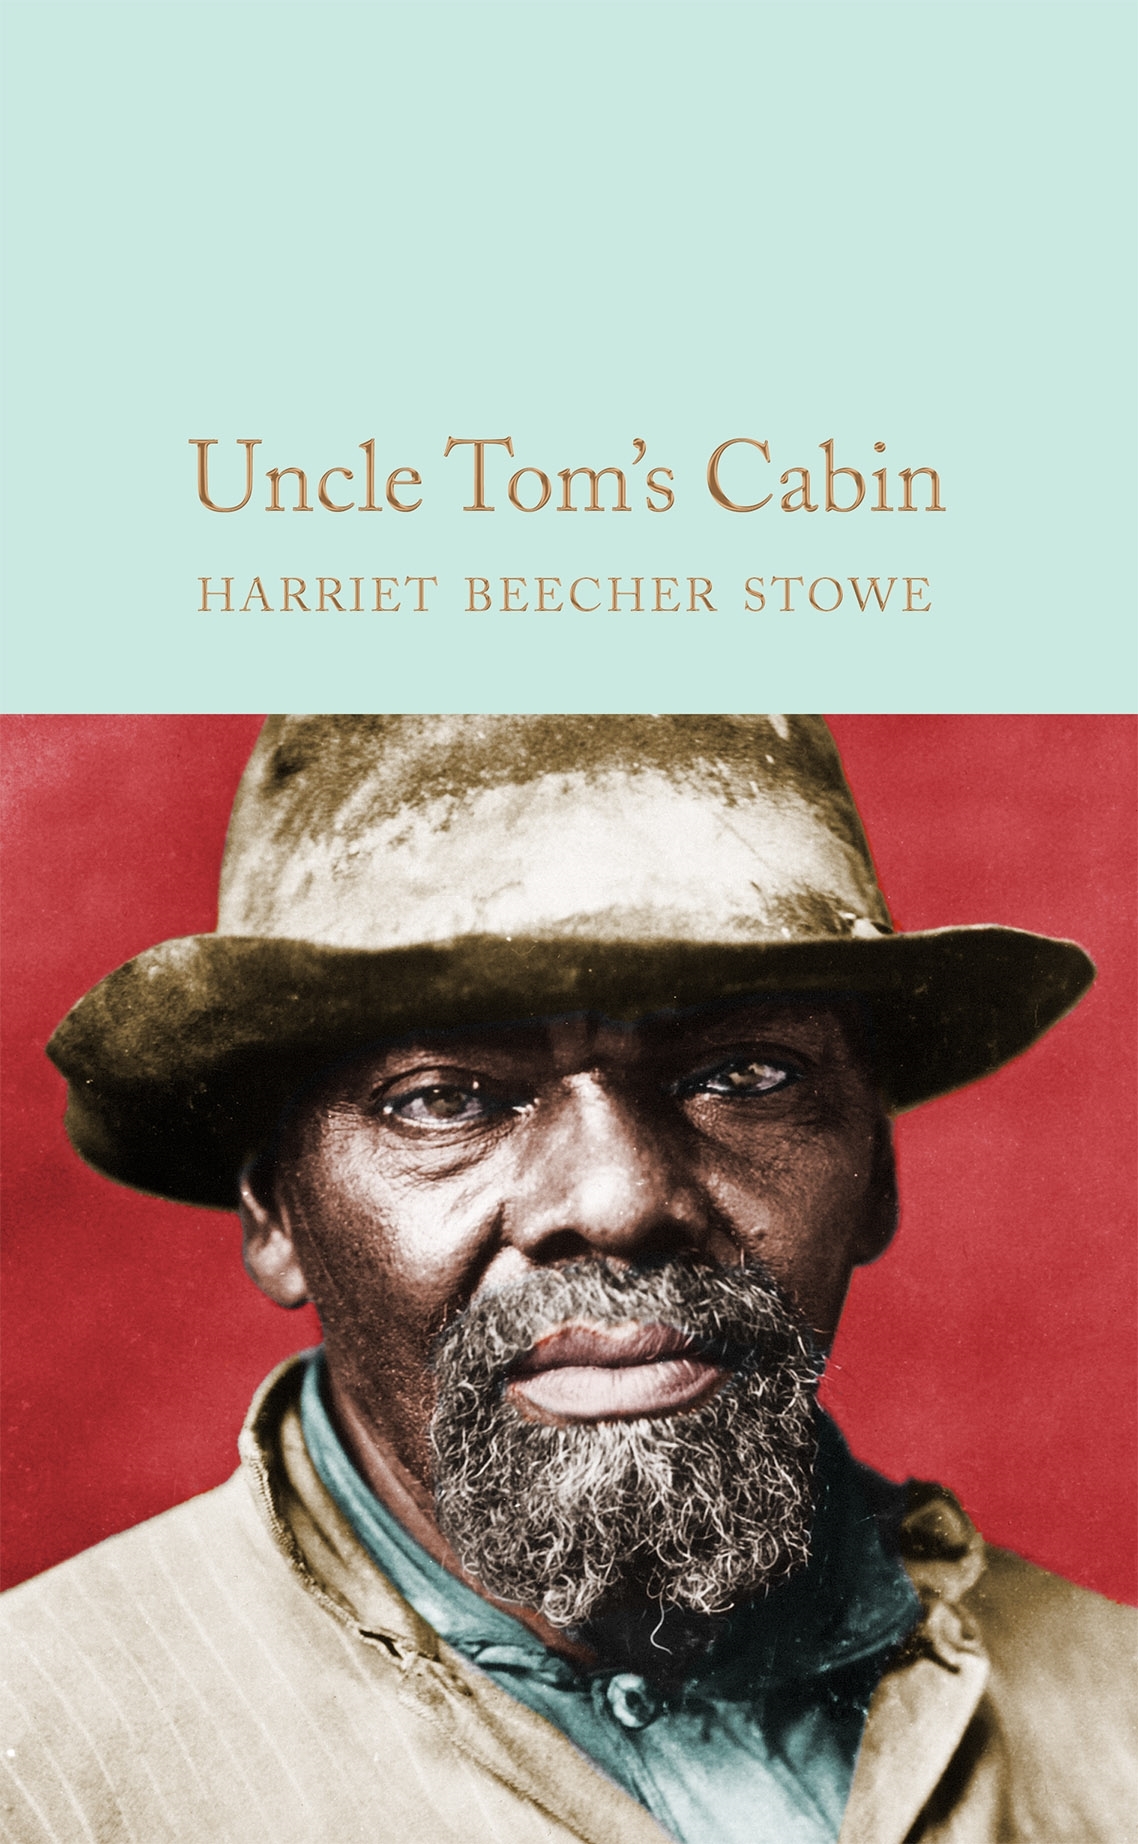 Book “Uncle Tom's Cabin” by Harriet Beecher Stowe — March 3, 2020